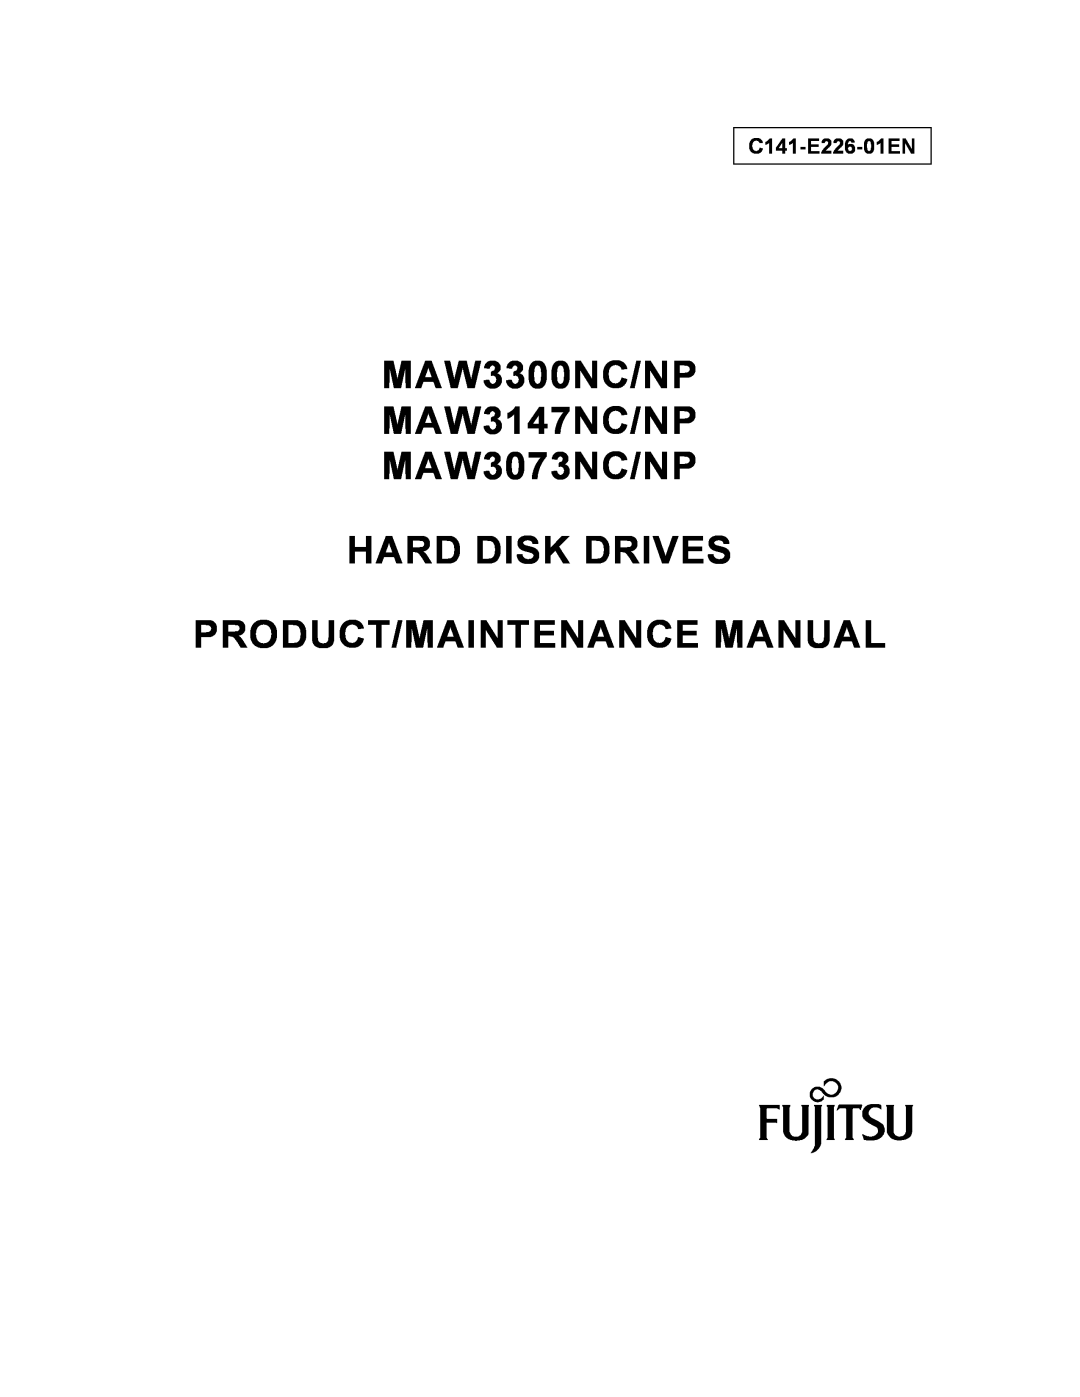 Fujitsu MAW3073NC/NP, MAW3300NC/NP specifications Handling, Reference value of airflow, Disk Drives Installation Guide 